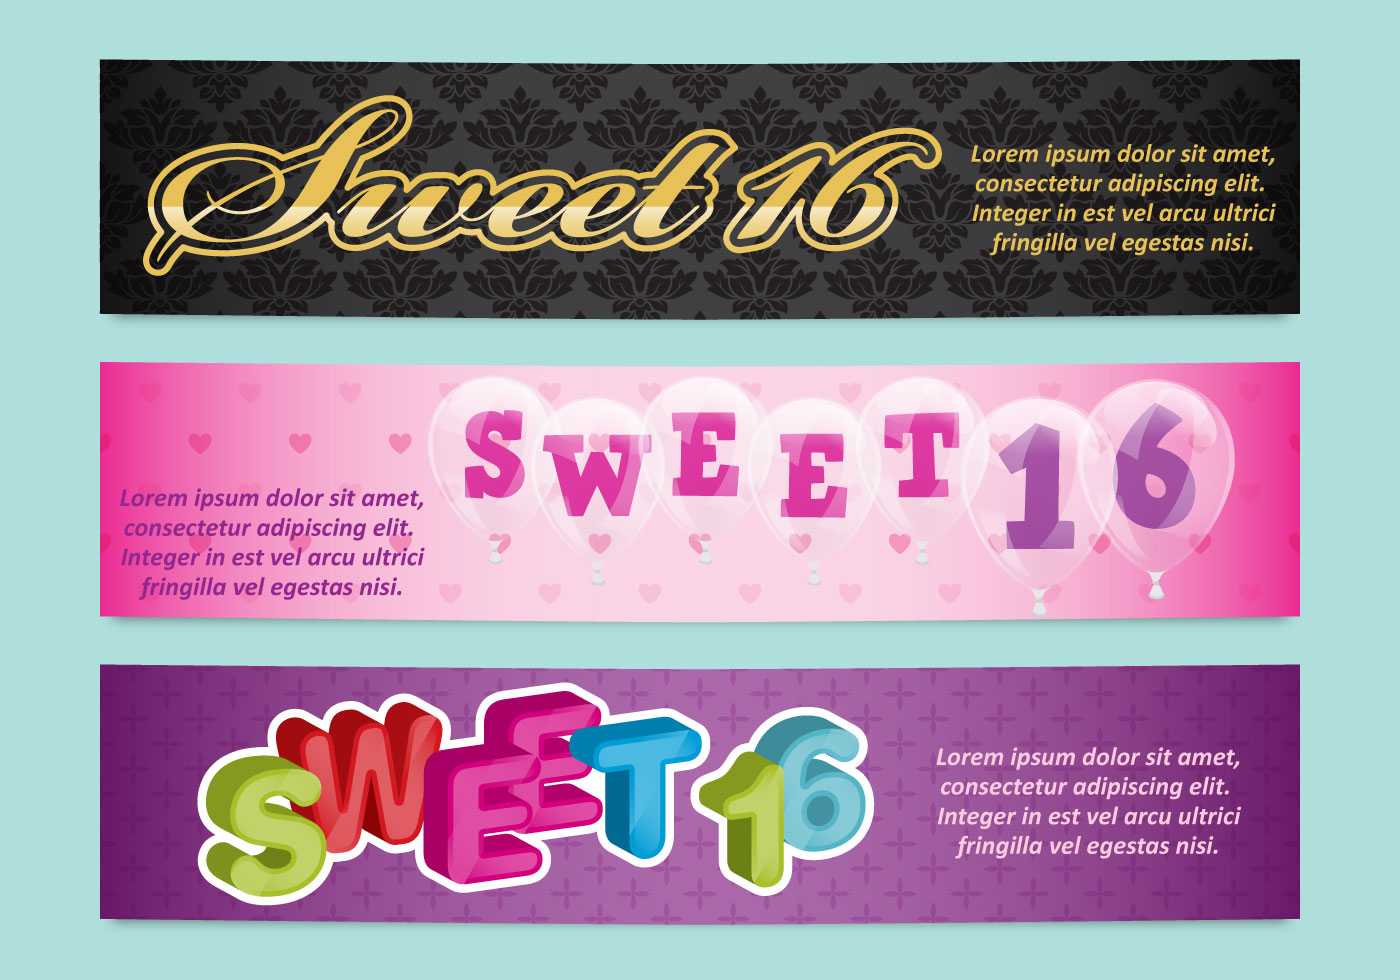 Banderol Free Vector Art – (5,141 Free Downloads) Intended For Sweet 16 Banner Template